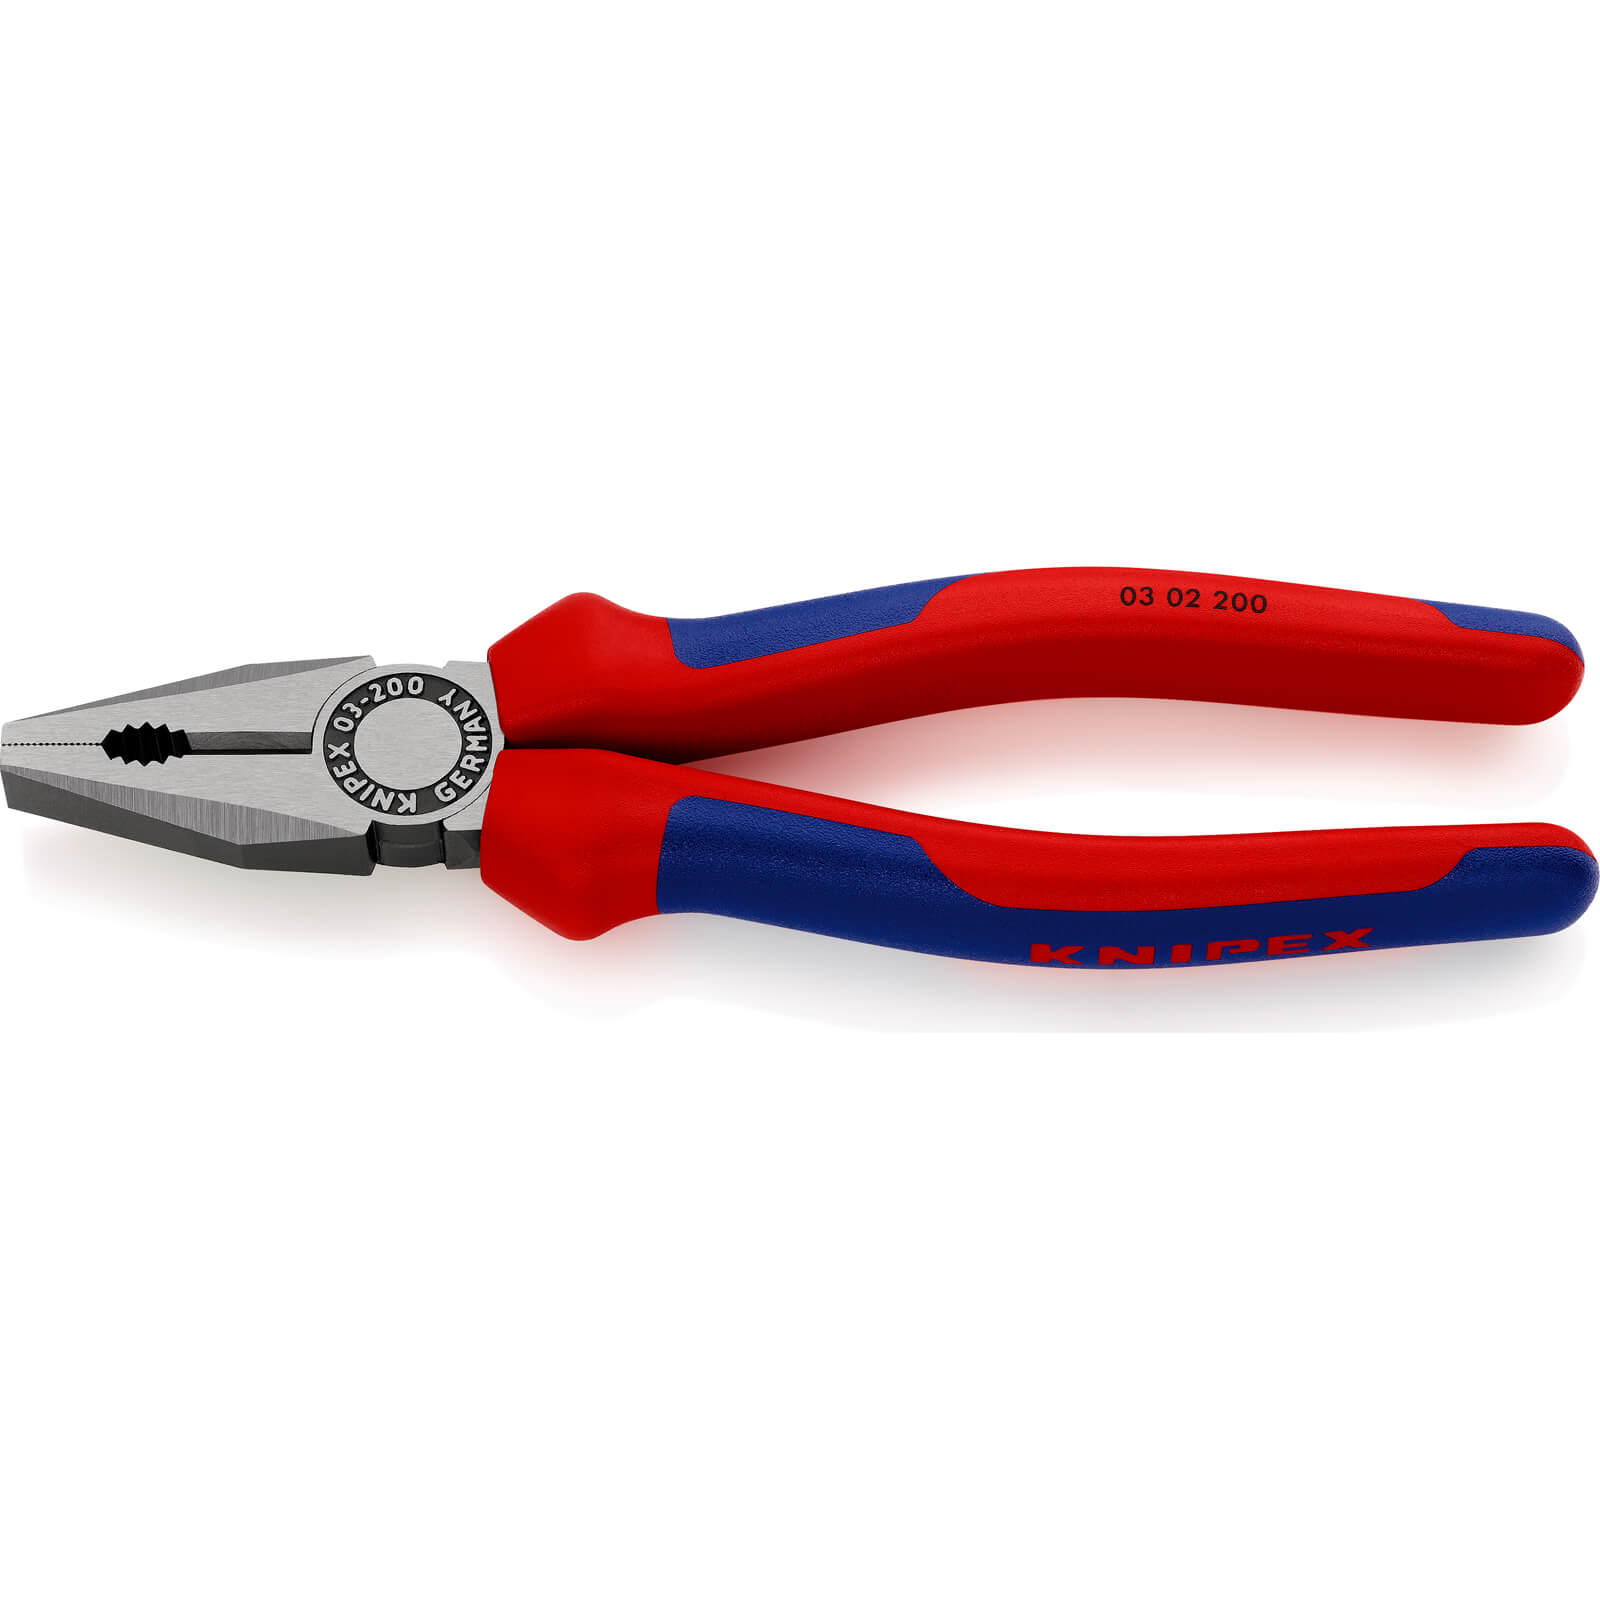 Image of Knipex 03 02 Combination Pliers 200mm